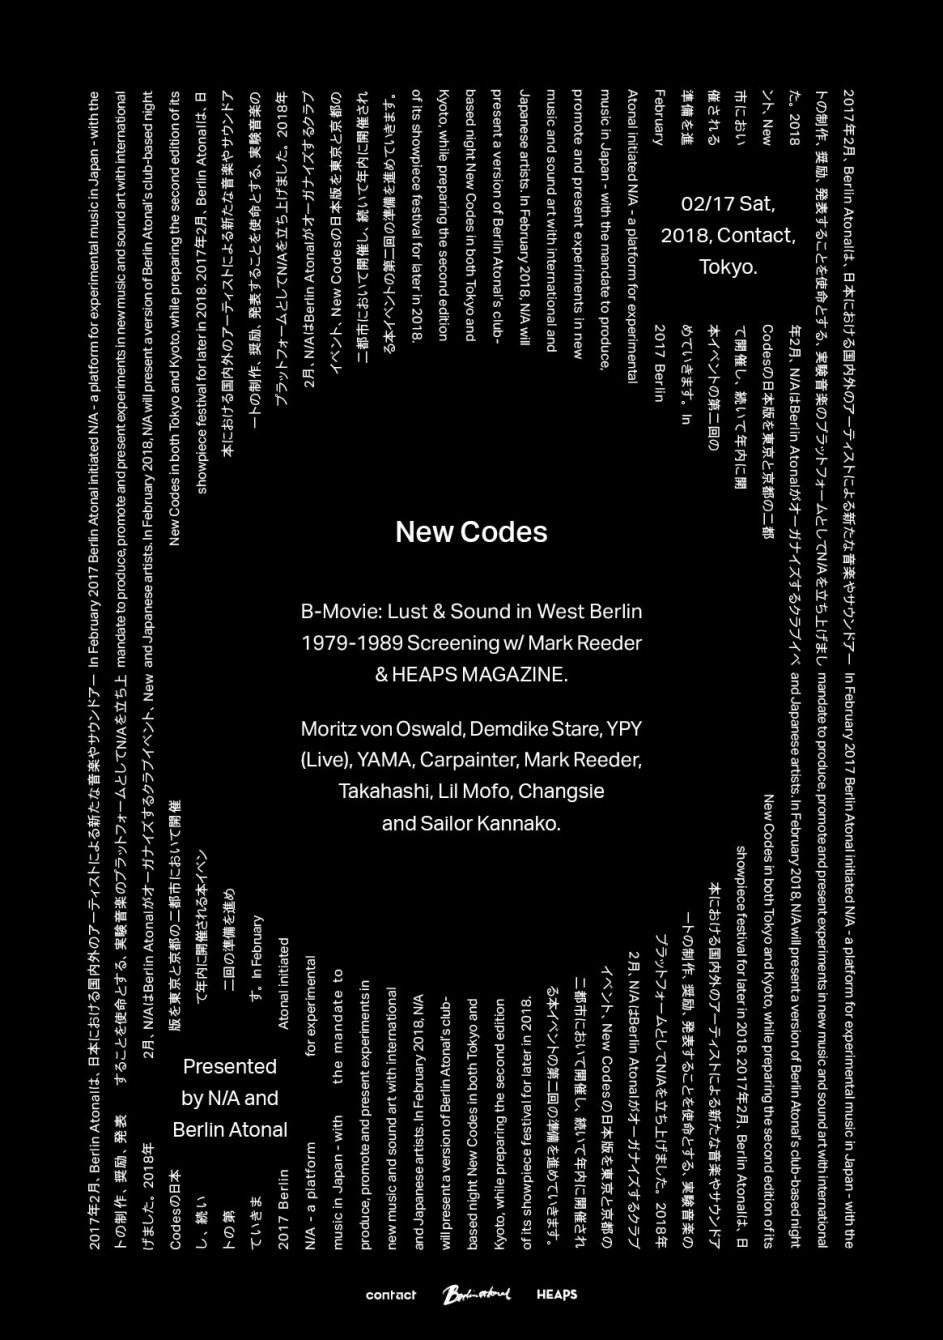 N/A and Berlin Atonal present New Codes - フライヤー裏